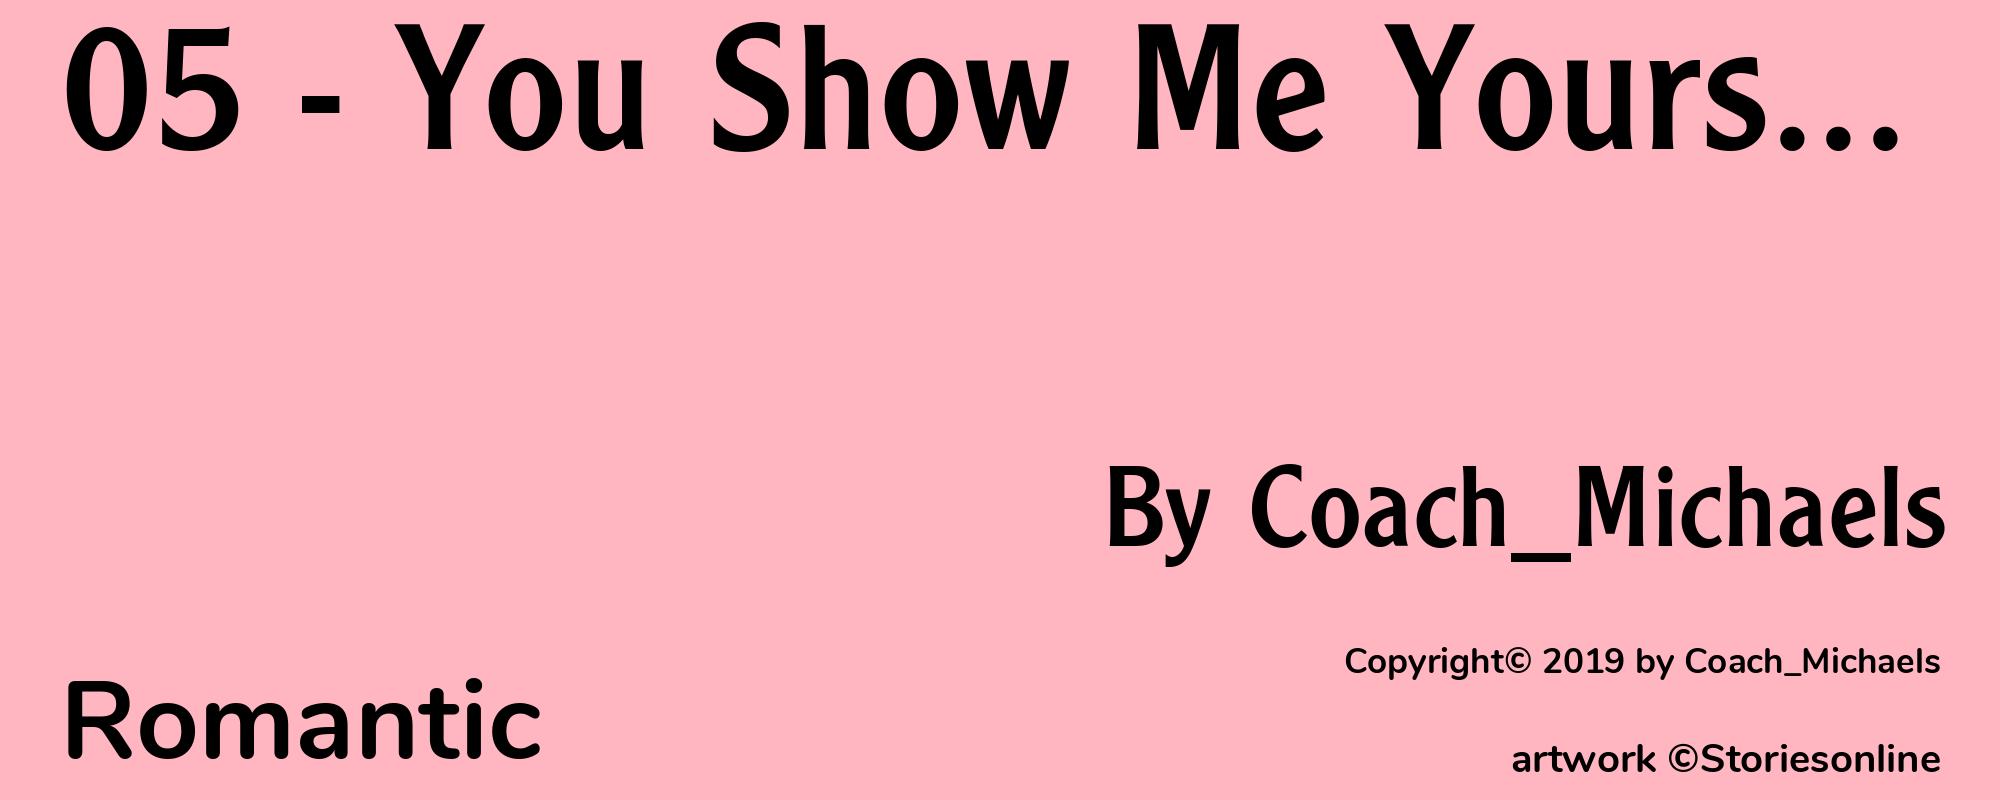 05 - You Show Me Yours... - Cover